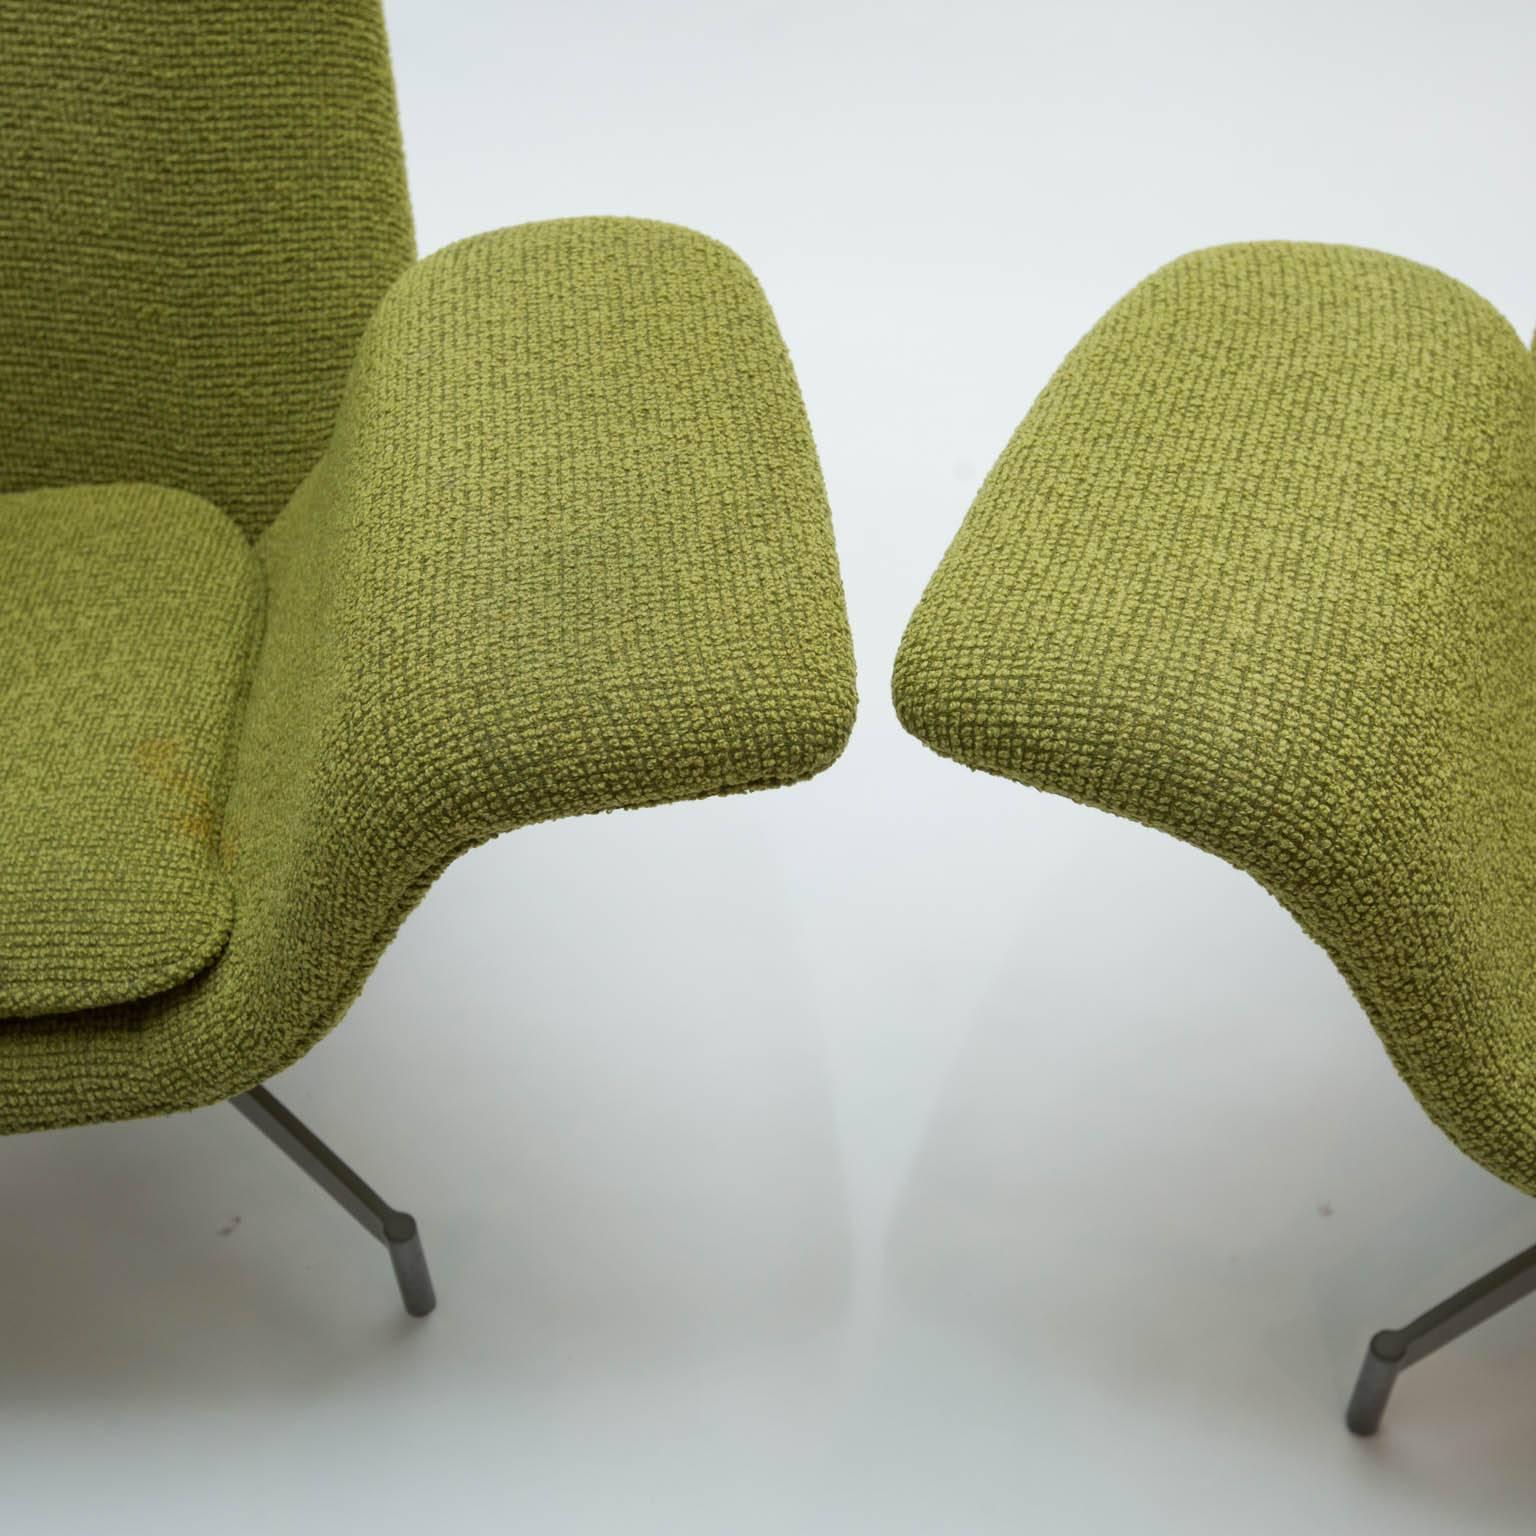 Powder-Coated Pair of Hbf Furniture Dialogue Lounge Chairs